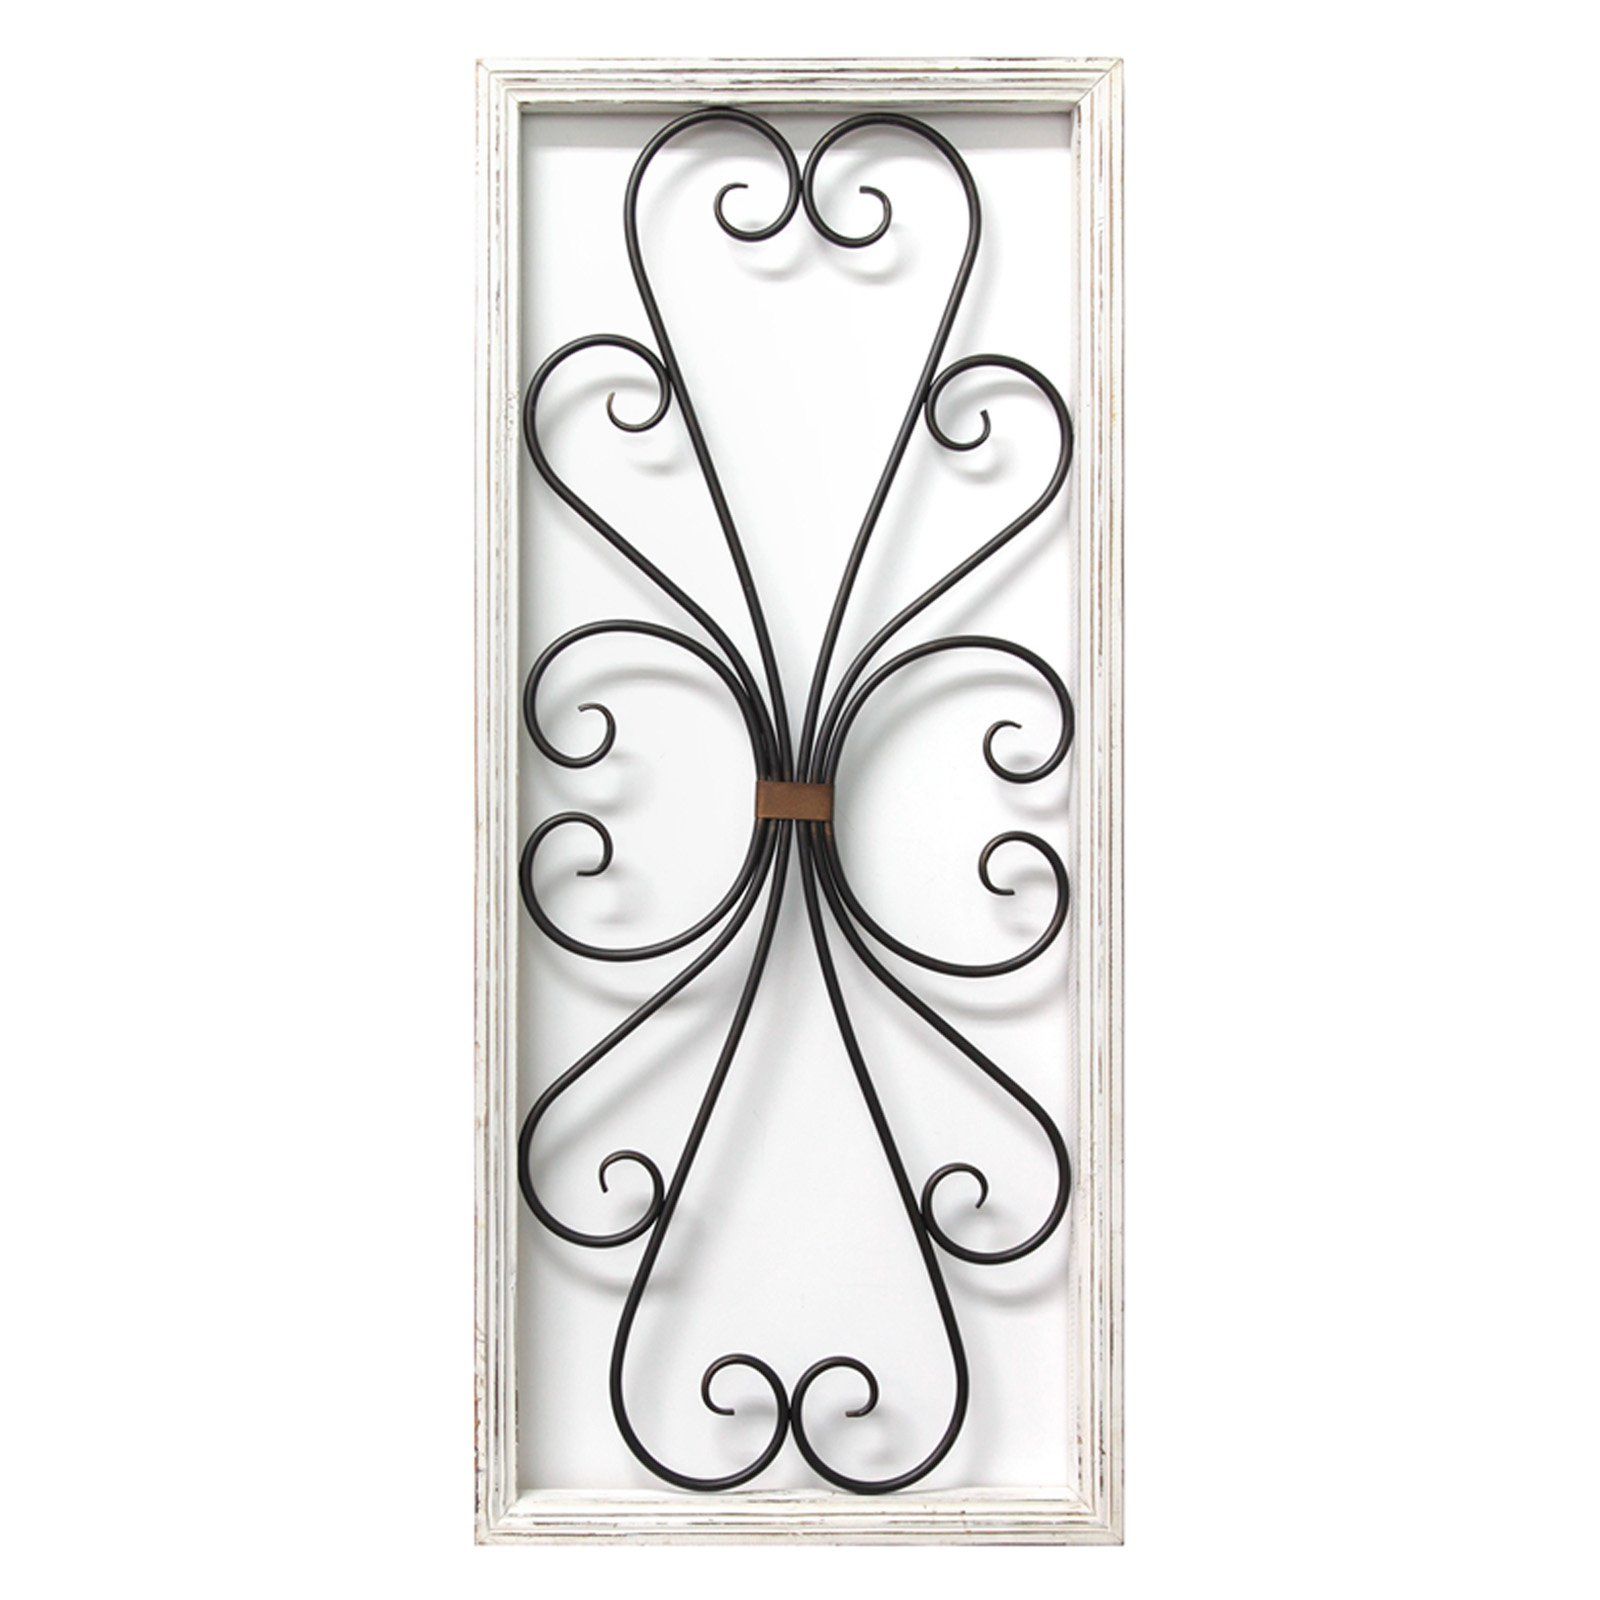 Fashionable Scroll Panel Wall Decor In Stratton Home Decor Distressed White Scroll Panel Wall Decor (View 14 of 20)